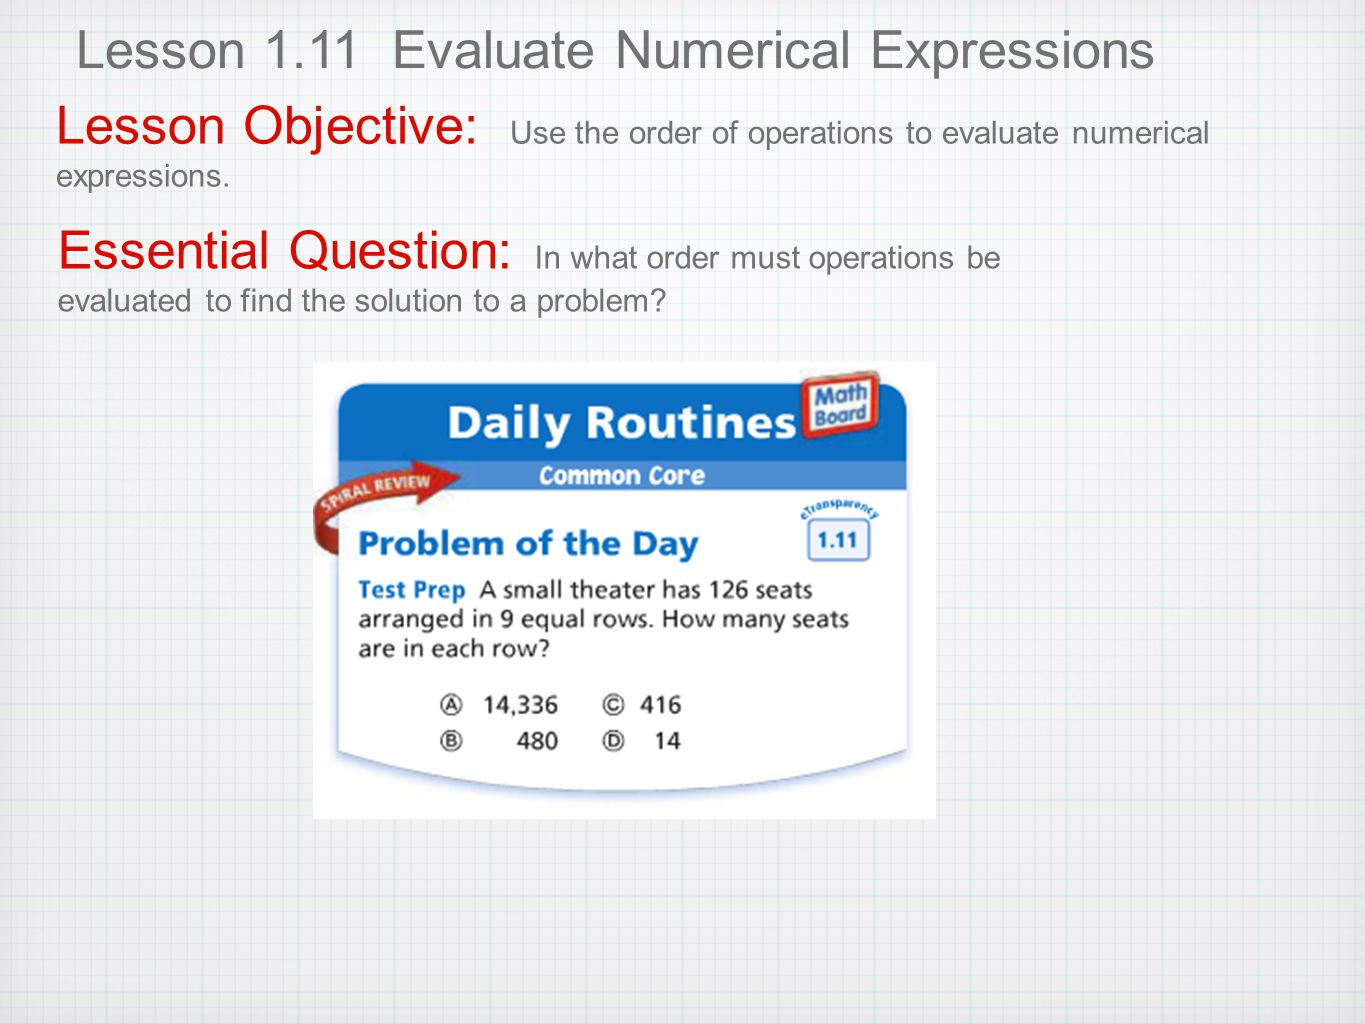 Lesson 1.11 Evaluate Numerical Expressions